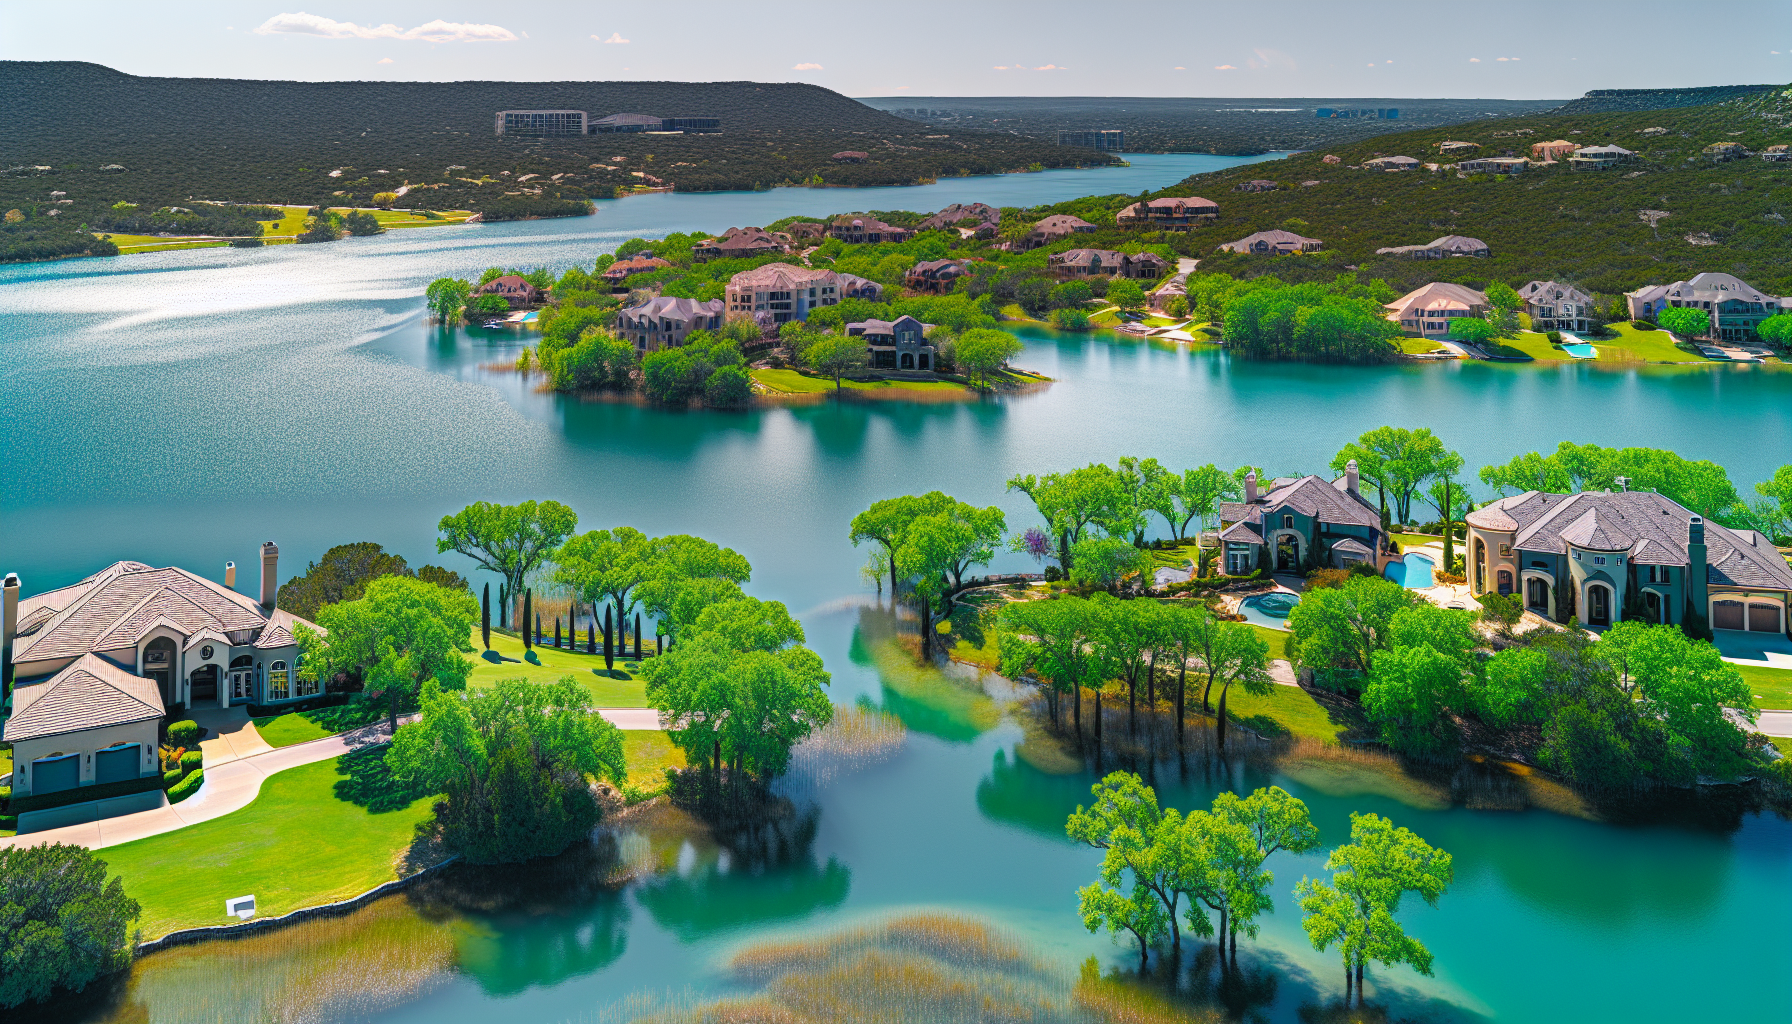 Scenic view of Lake Travis from a gated community